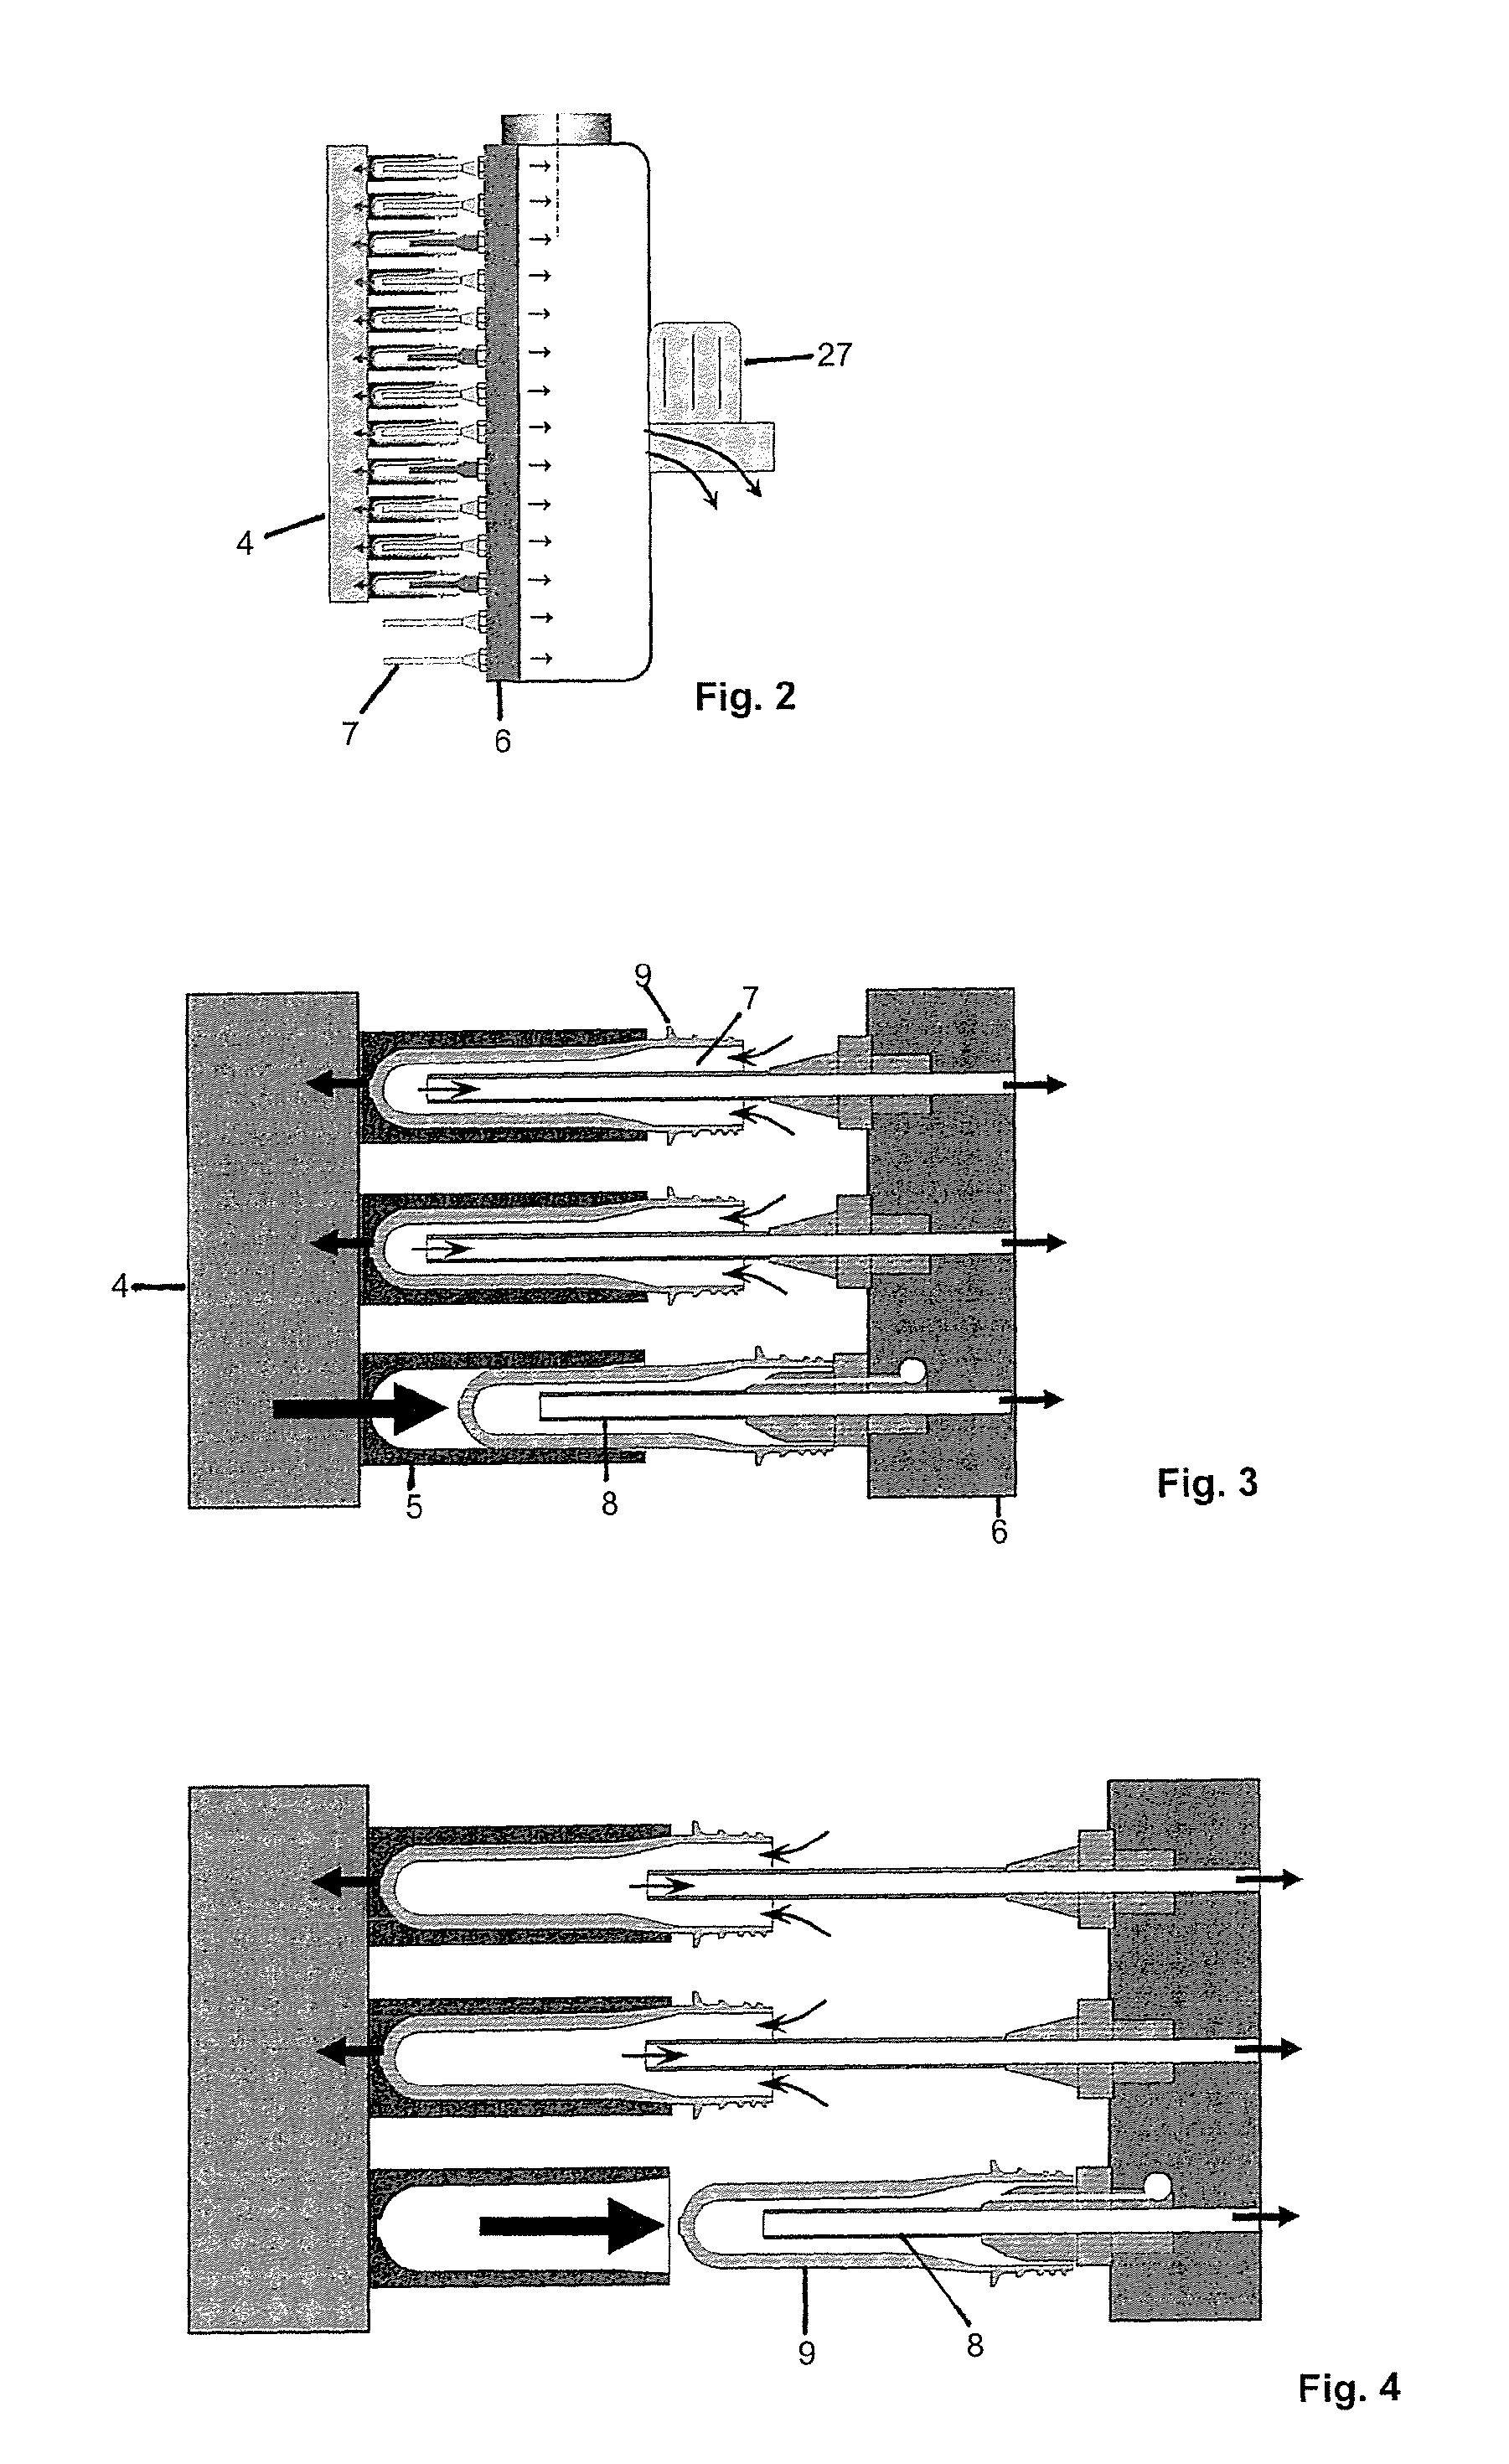 System for post-treating and transferring preforms